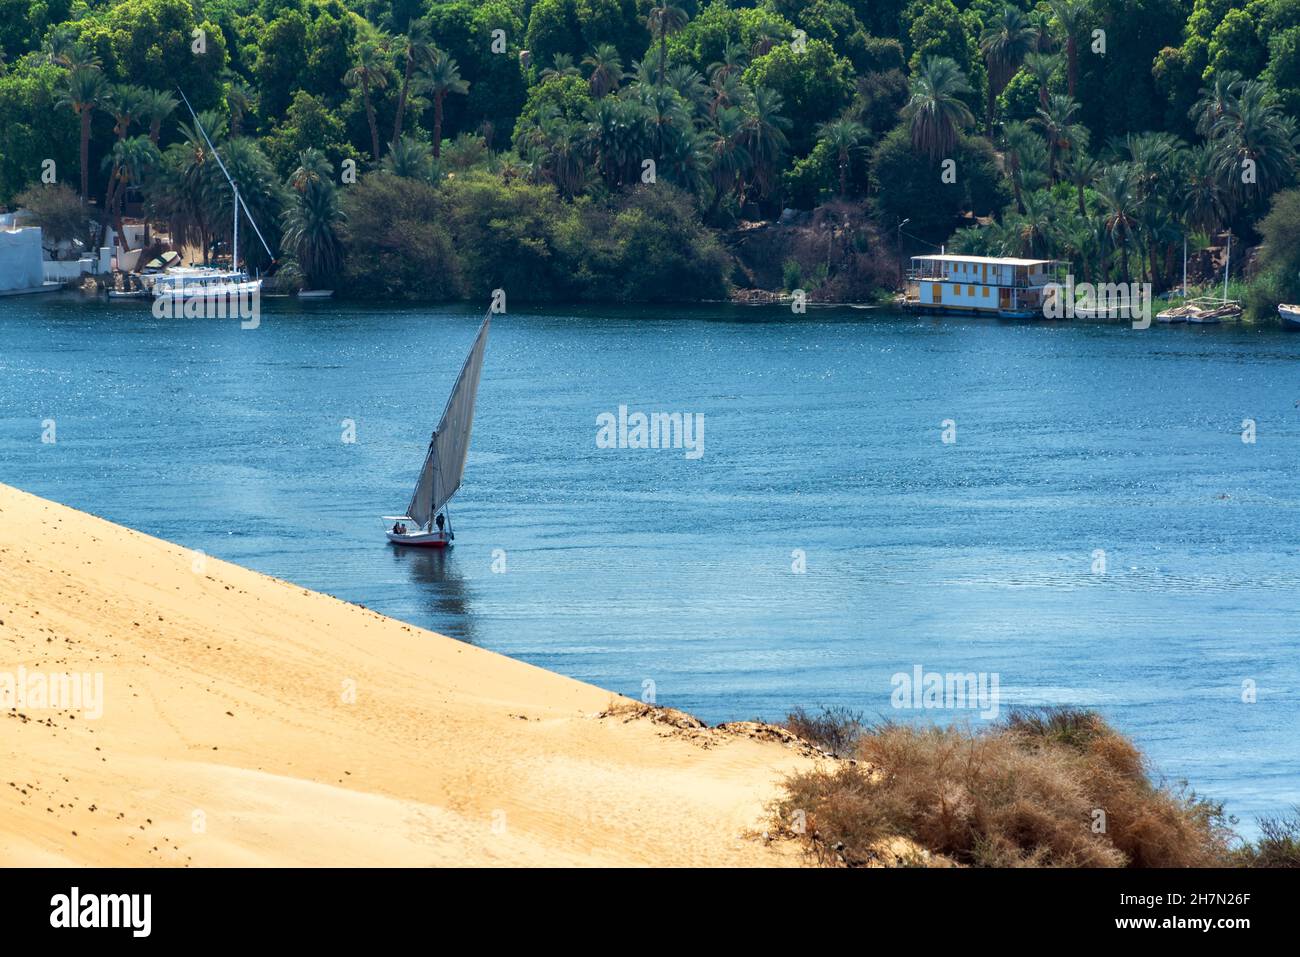 Traditional boat, felucca, sailing past sand dunes and palm trees on the Nile River in Aswan, Egypt Stock Photo